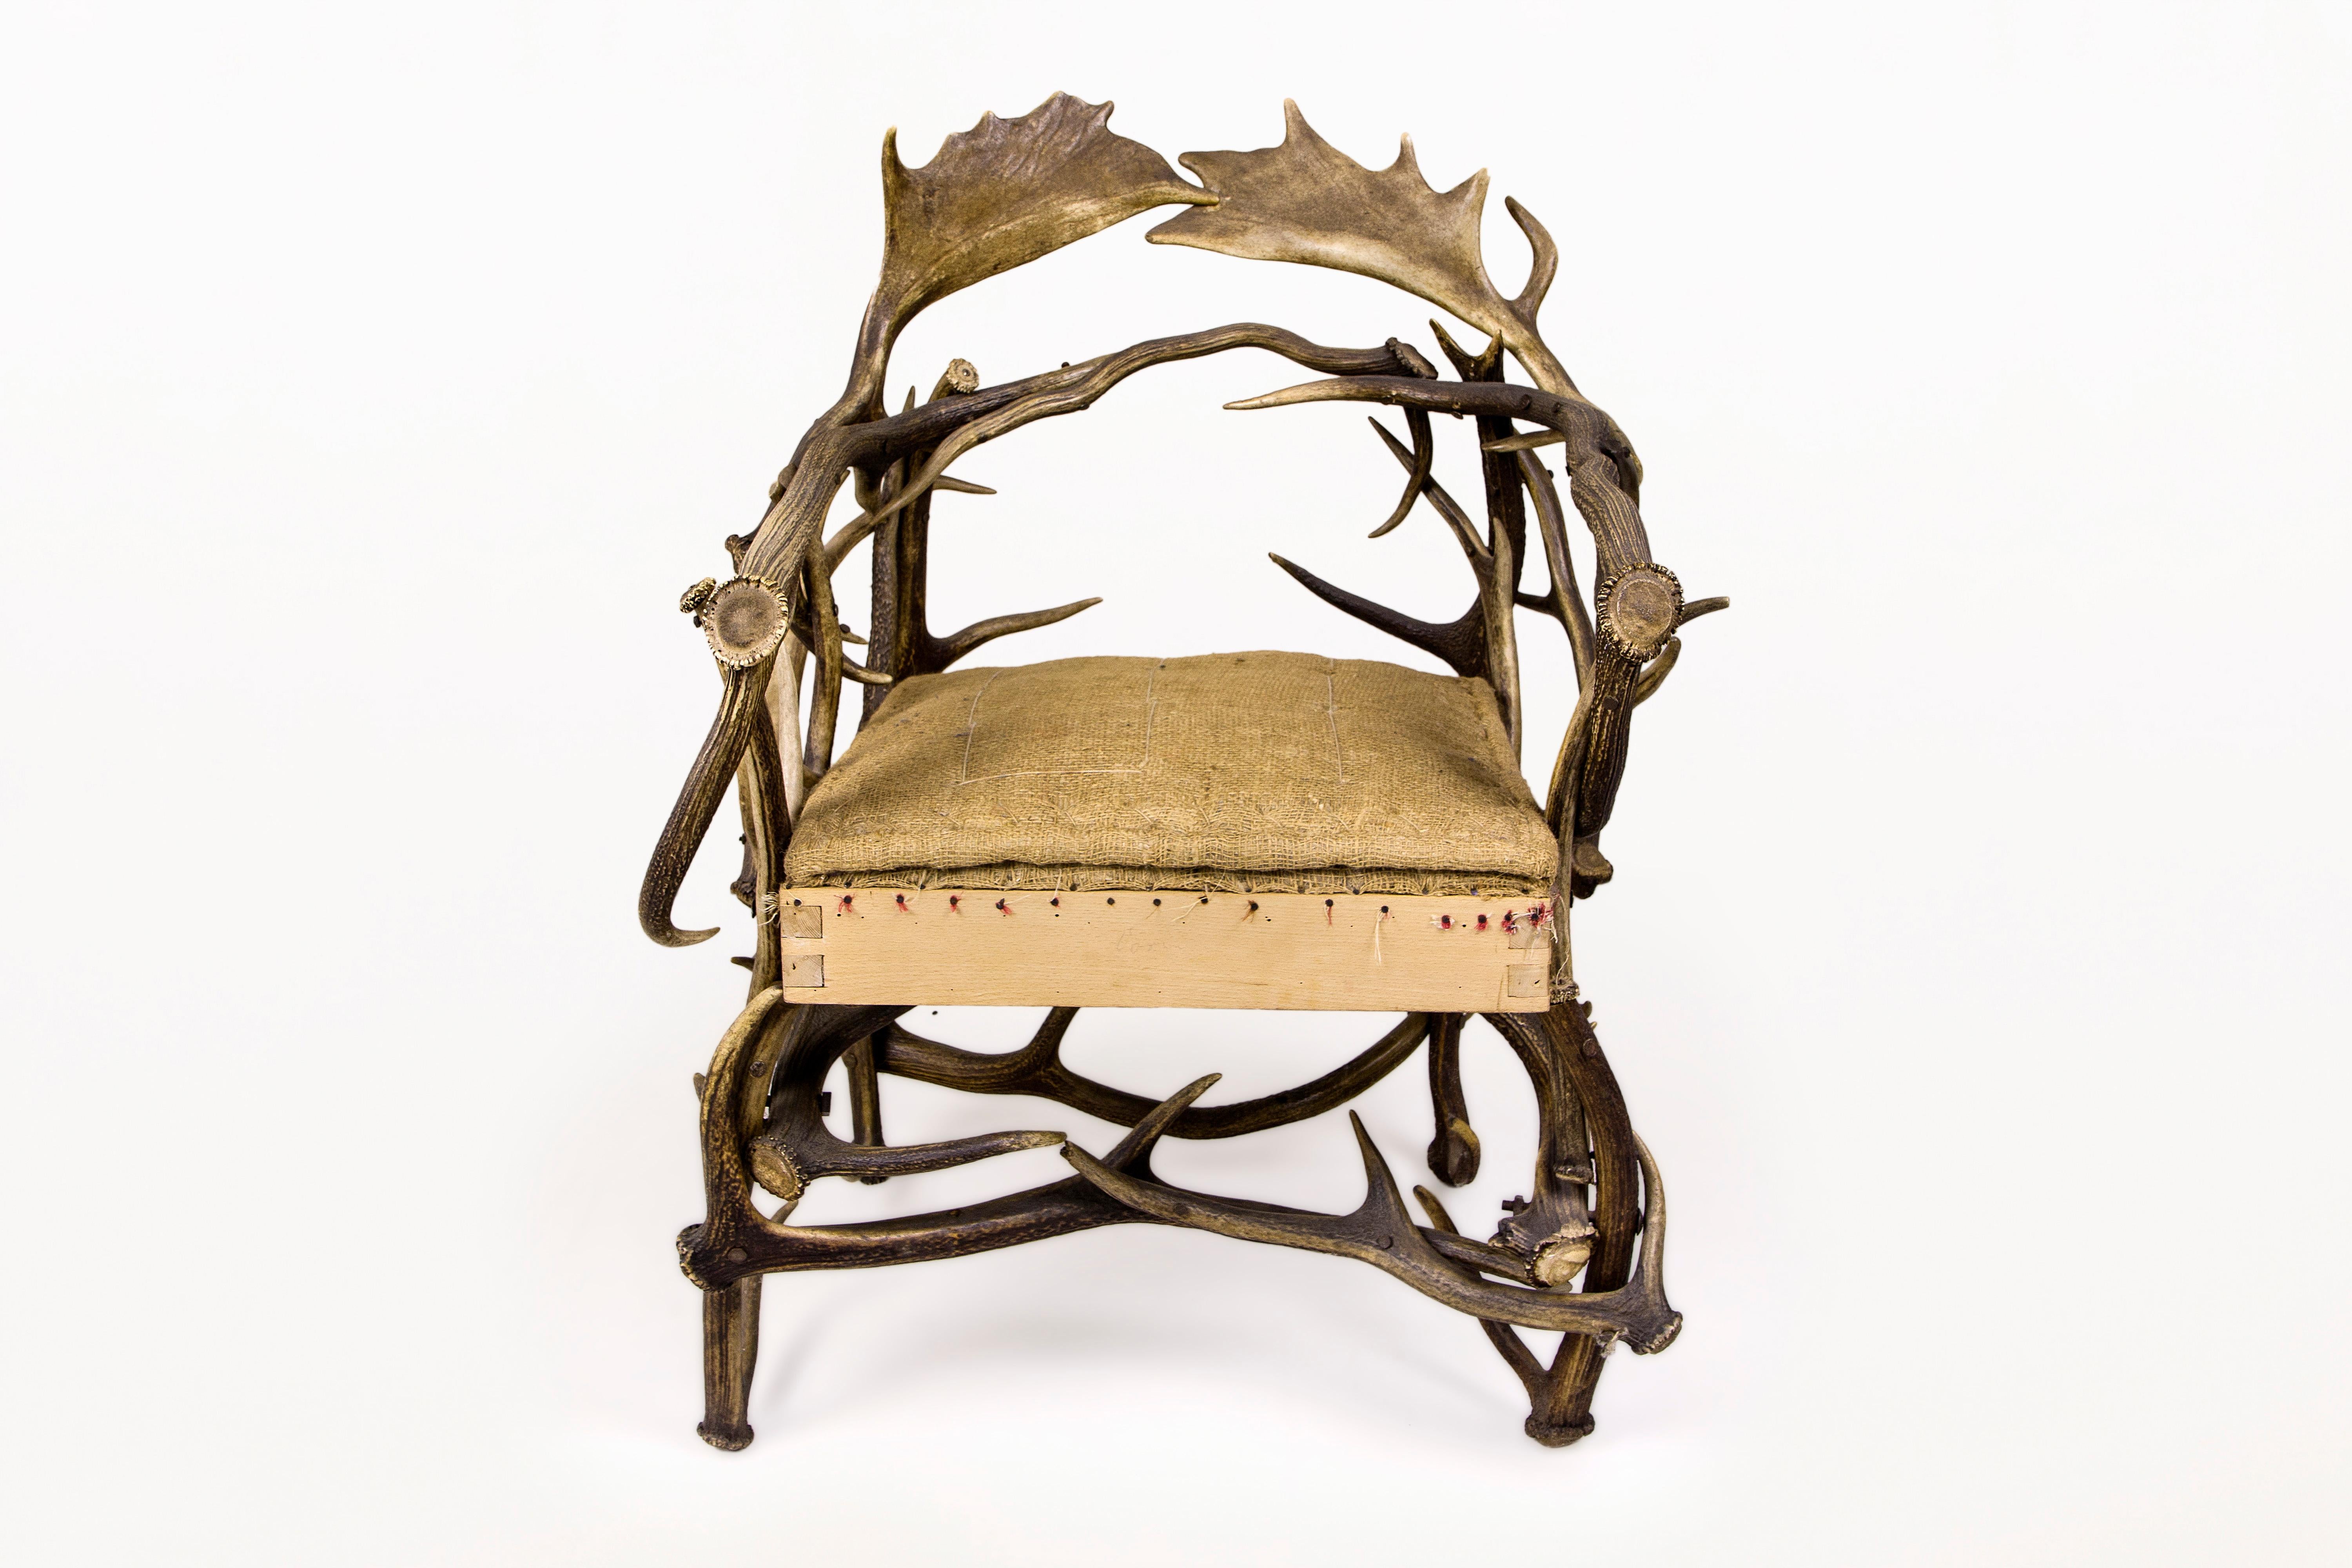 Antler armchair
Needs to be reupholstered 
United Kingdom, circa 1920
Good vintage condition.